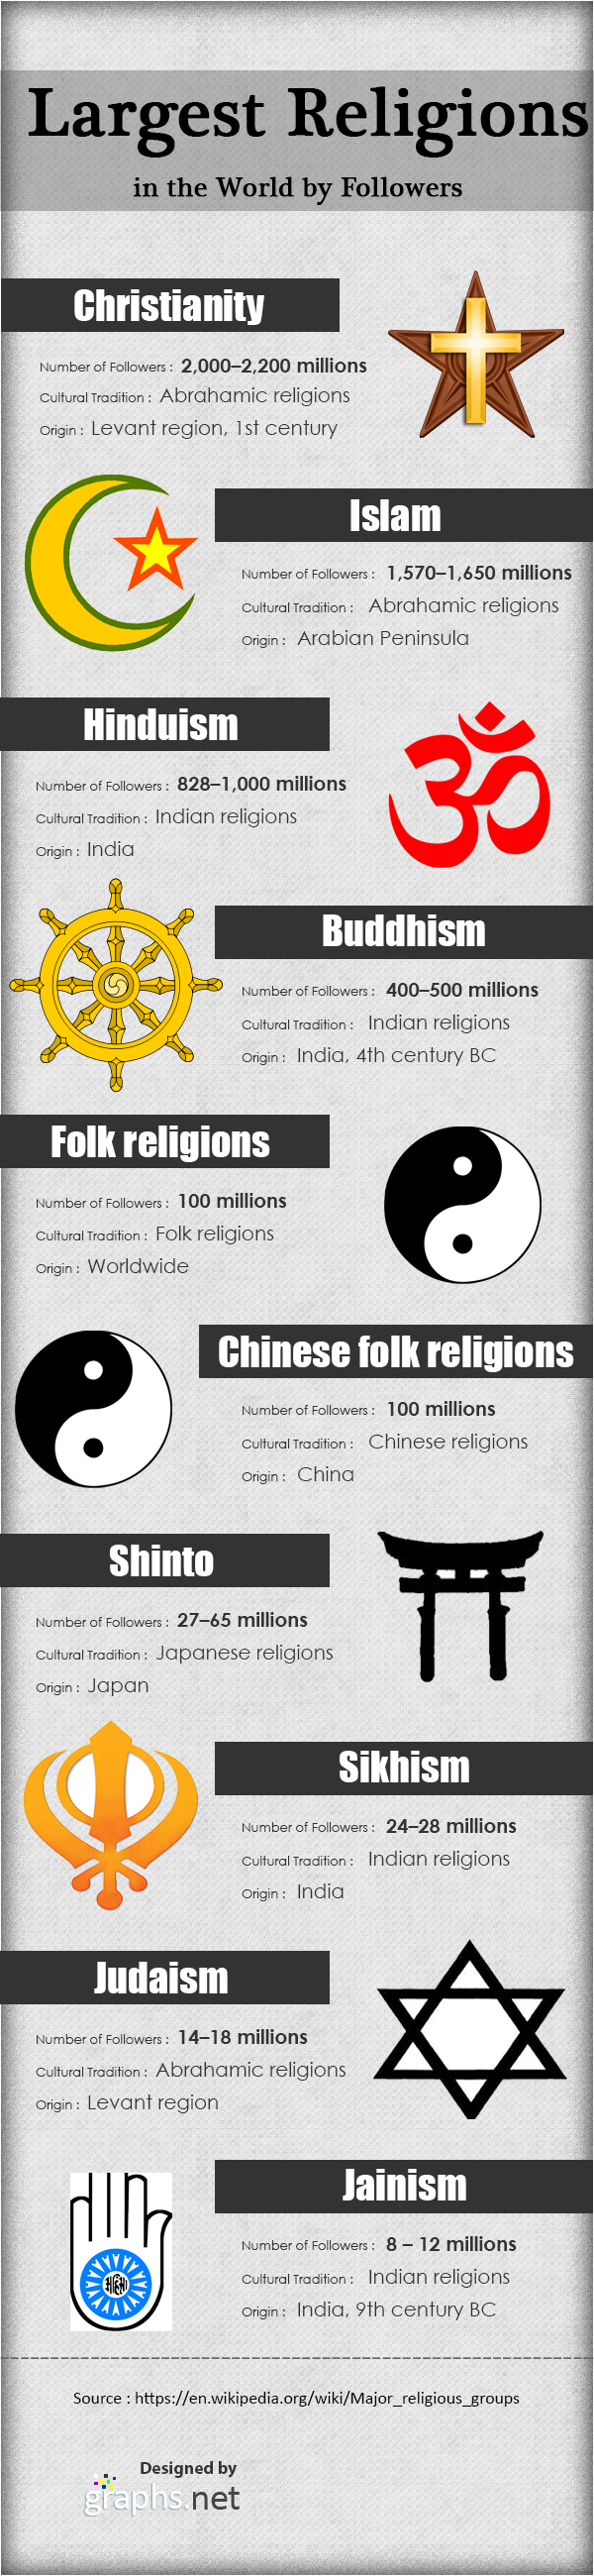 Largest Religions in the World by Followers